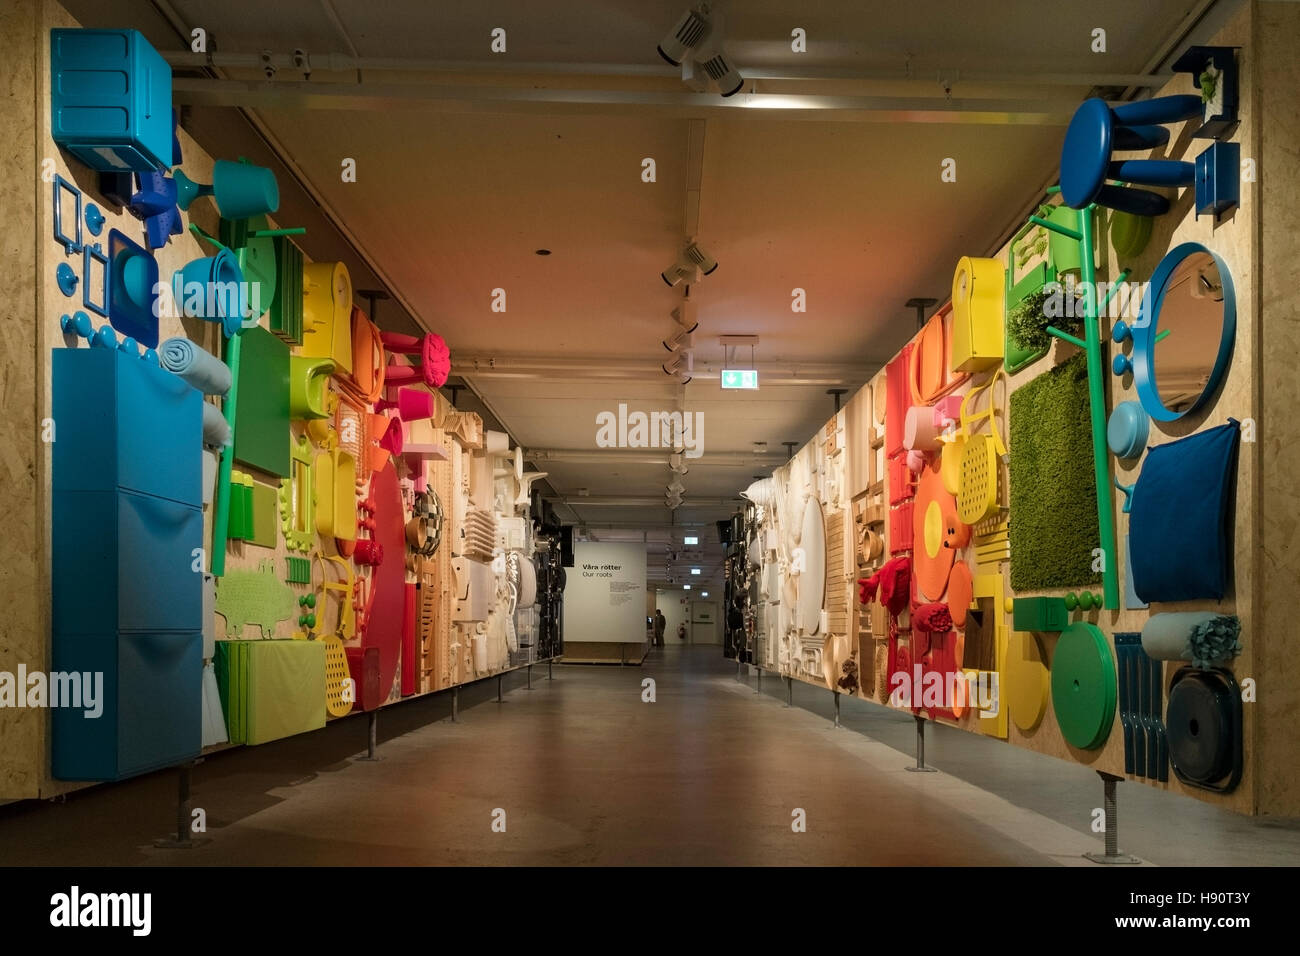 Interior of the Ikea museum in Almhult, Sweden, Scandinavia Stock Photo